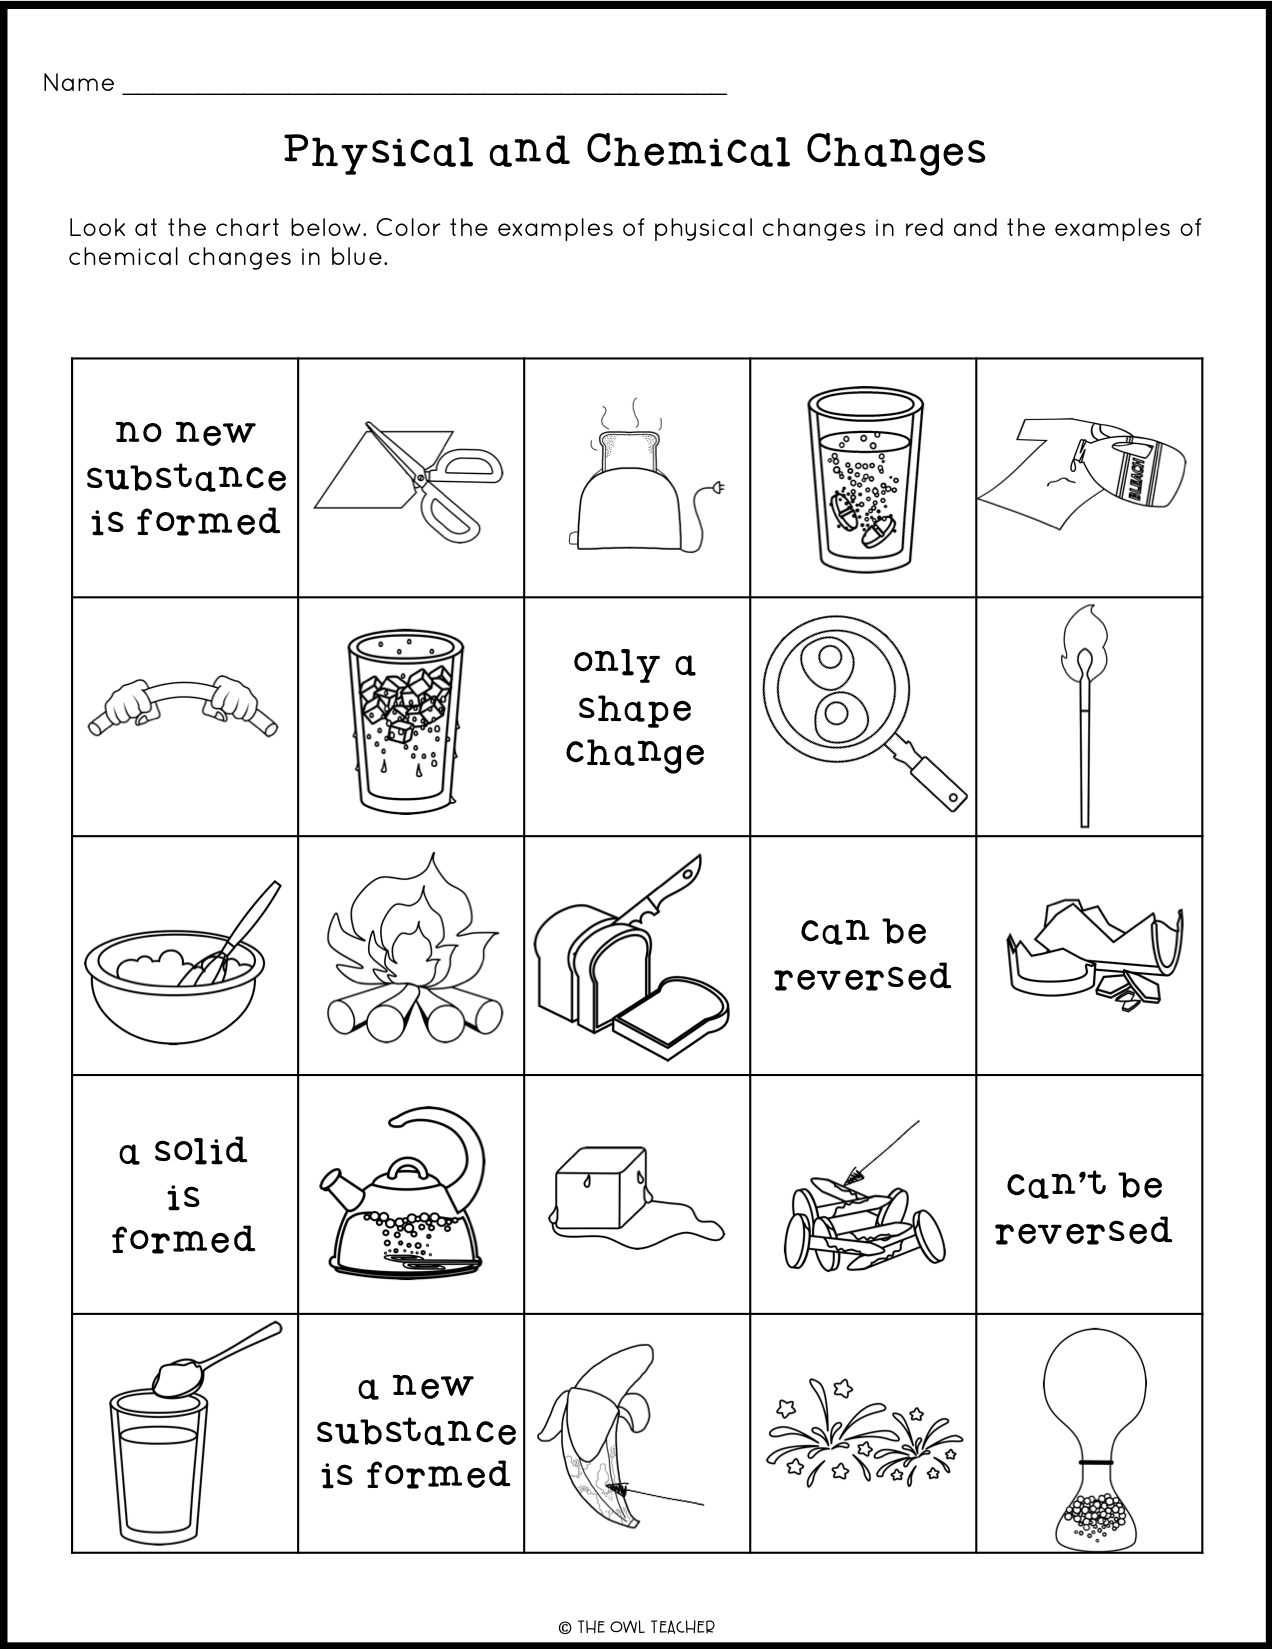 Physical and Chemical Changes Craftivity - The Owl Teacher Regarding Physical And Chemical Changes Worksheet